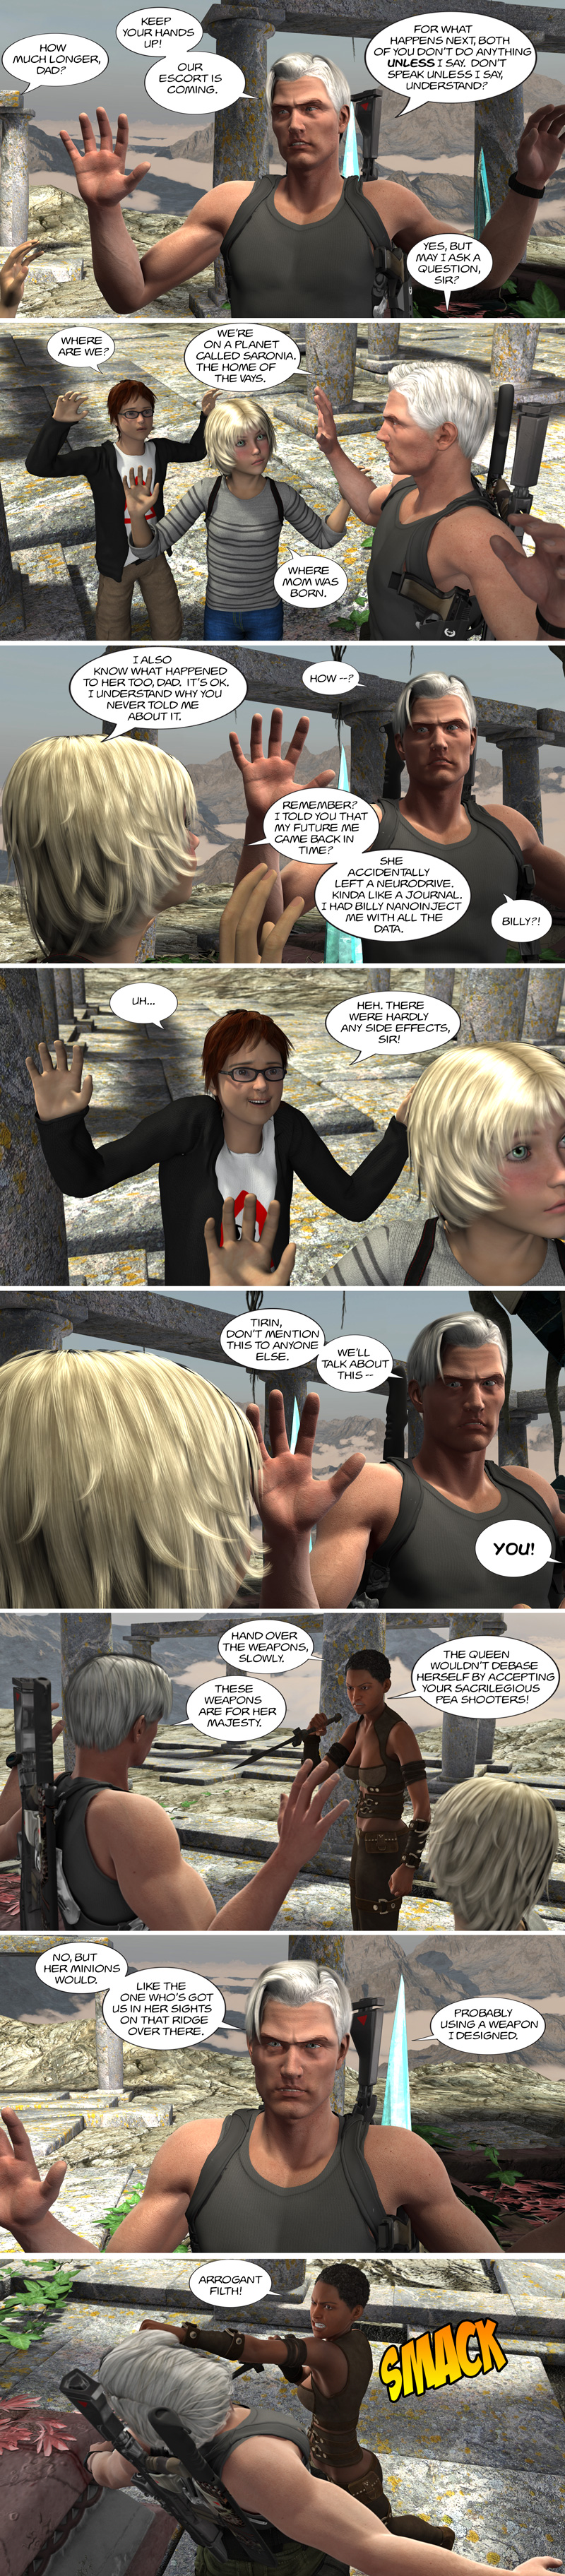 Chapter 11, page 40 – Felina let’s Samson know how she really feels